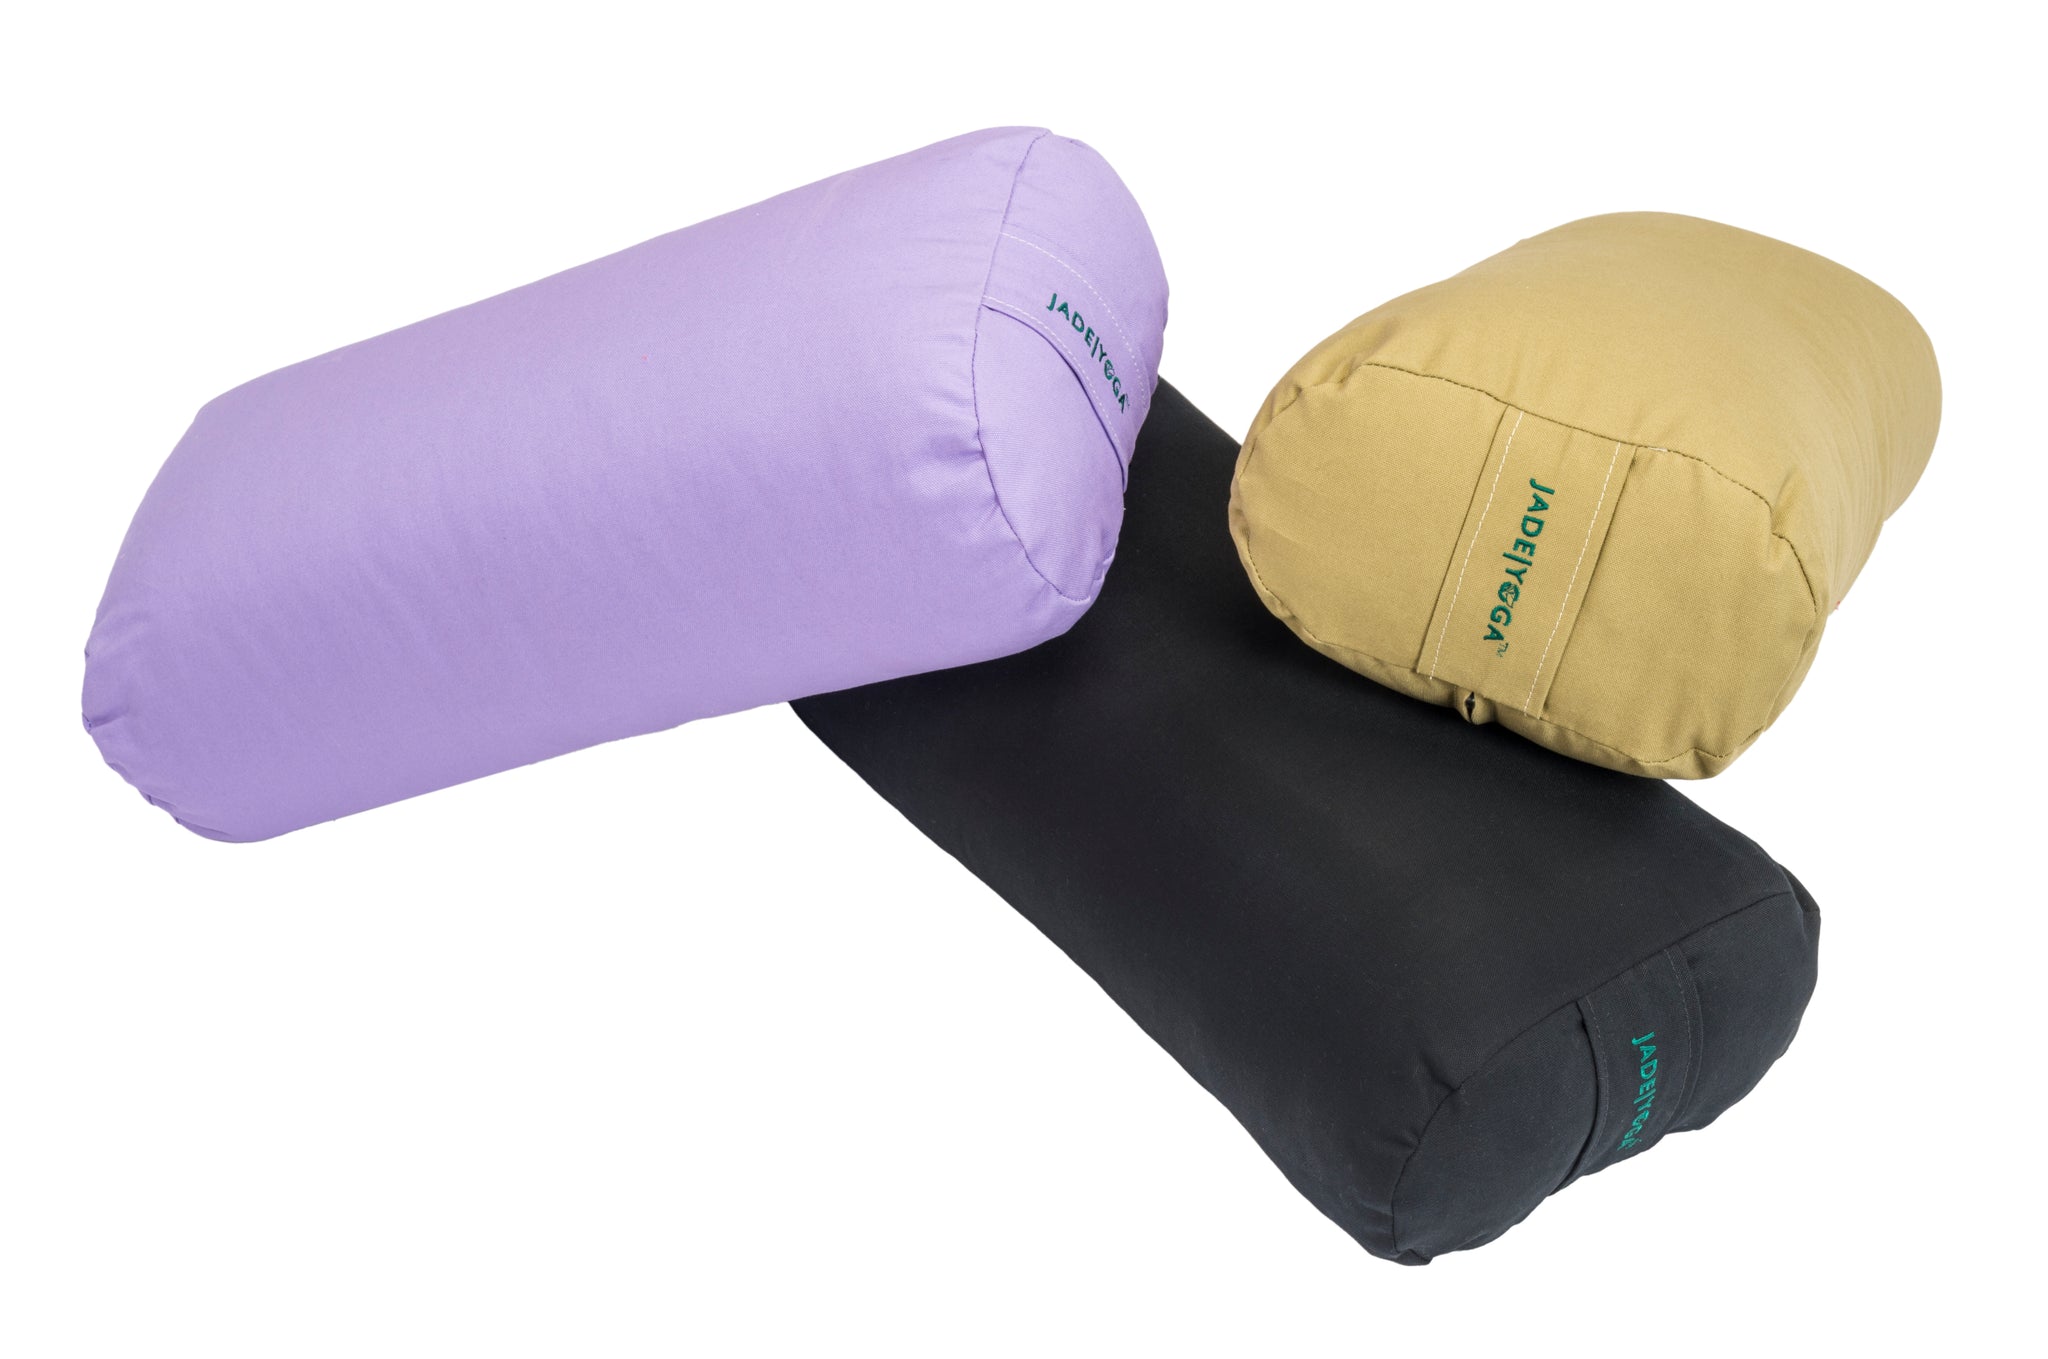 Everyday Yoga High Impact Round Yoga Bolster at YogaOutlet.com –